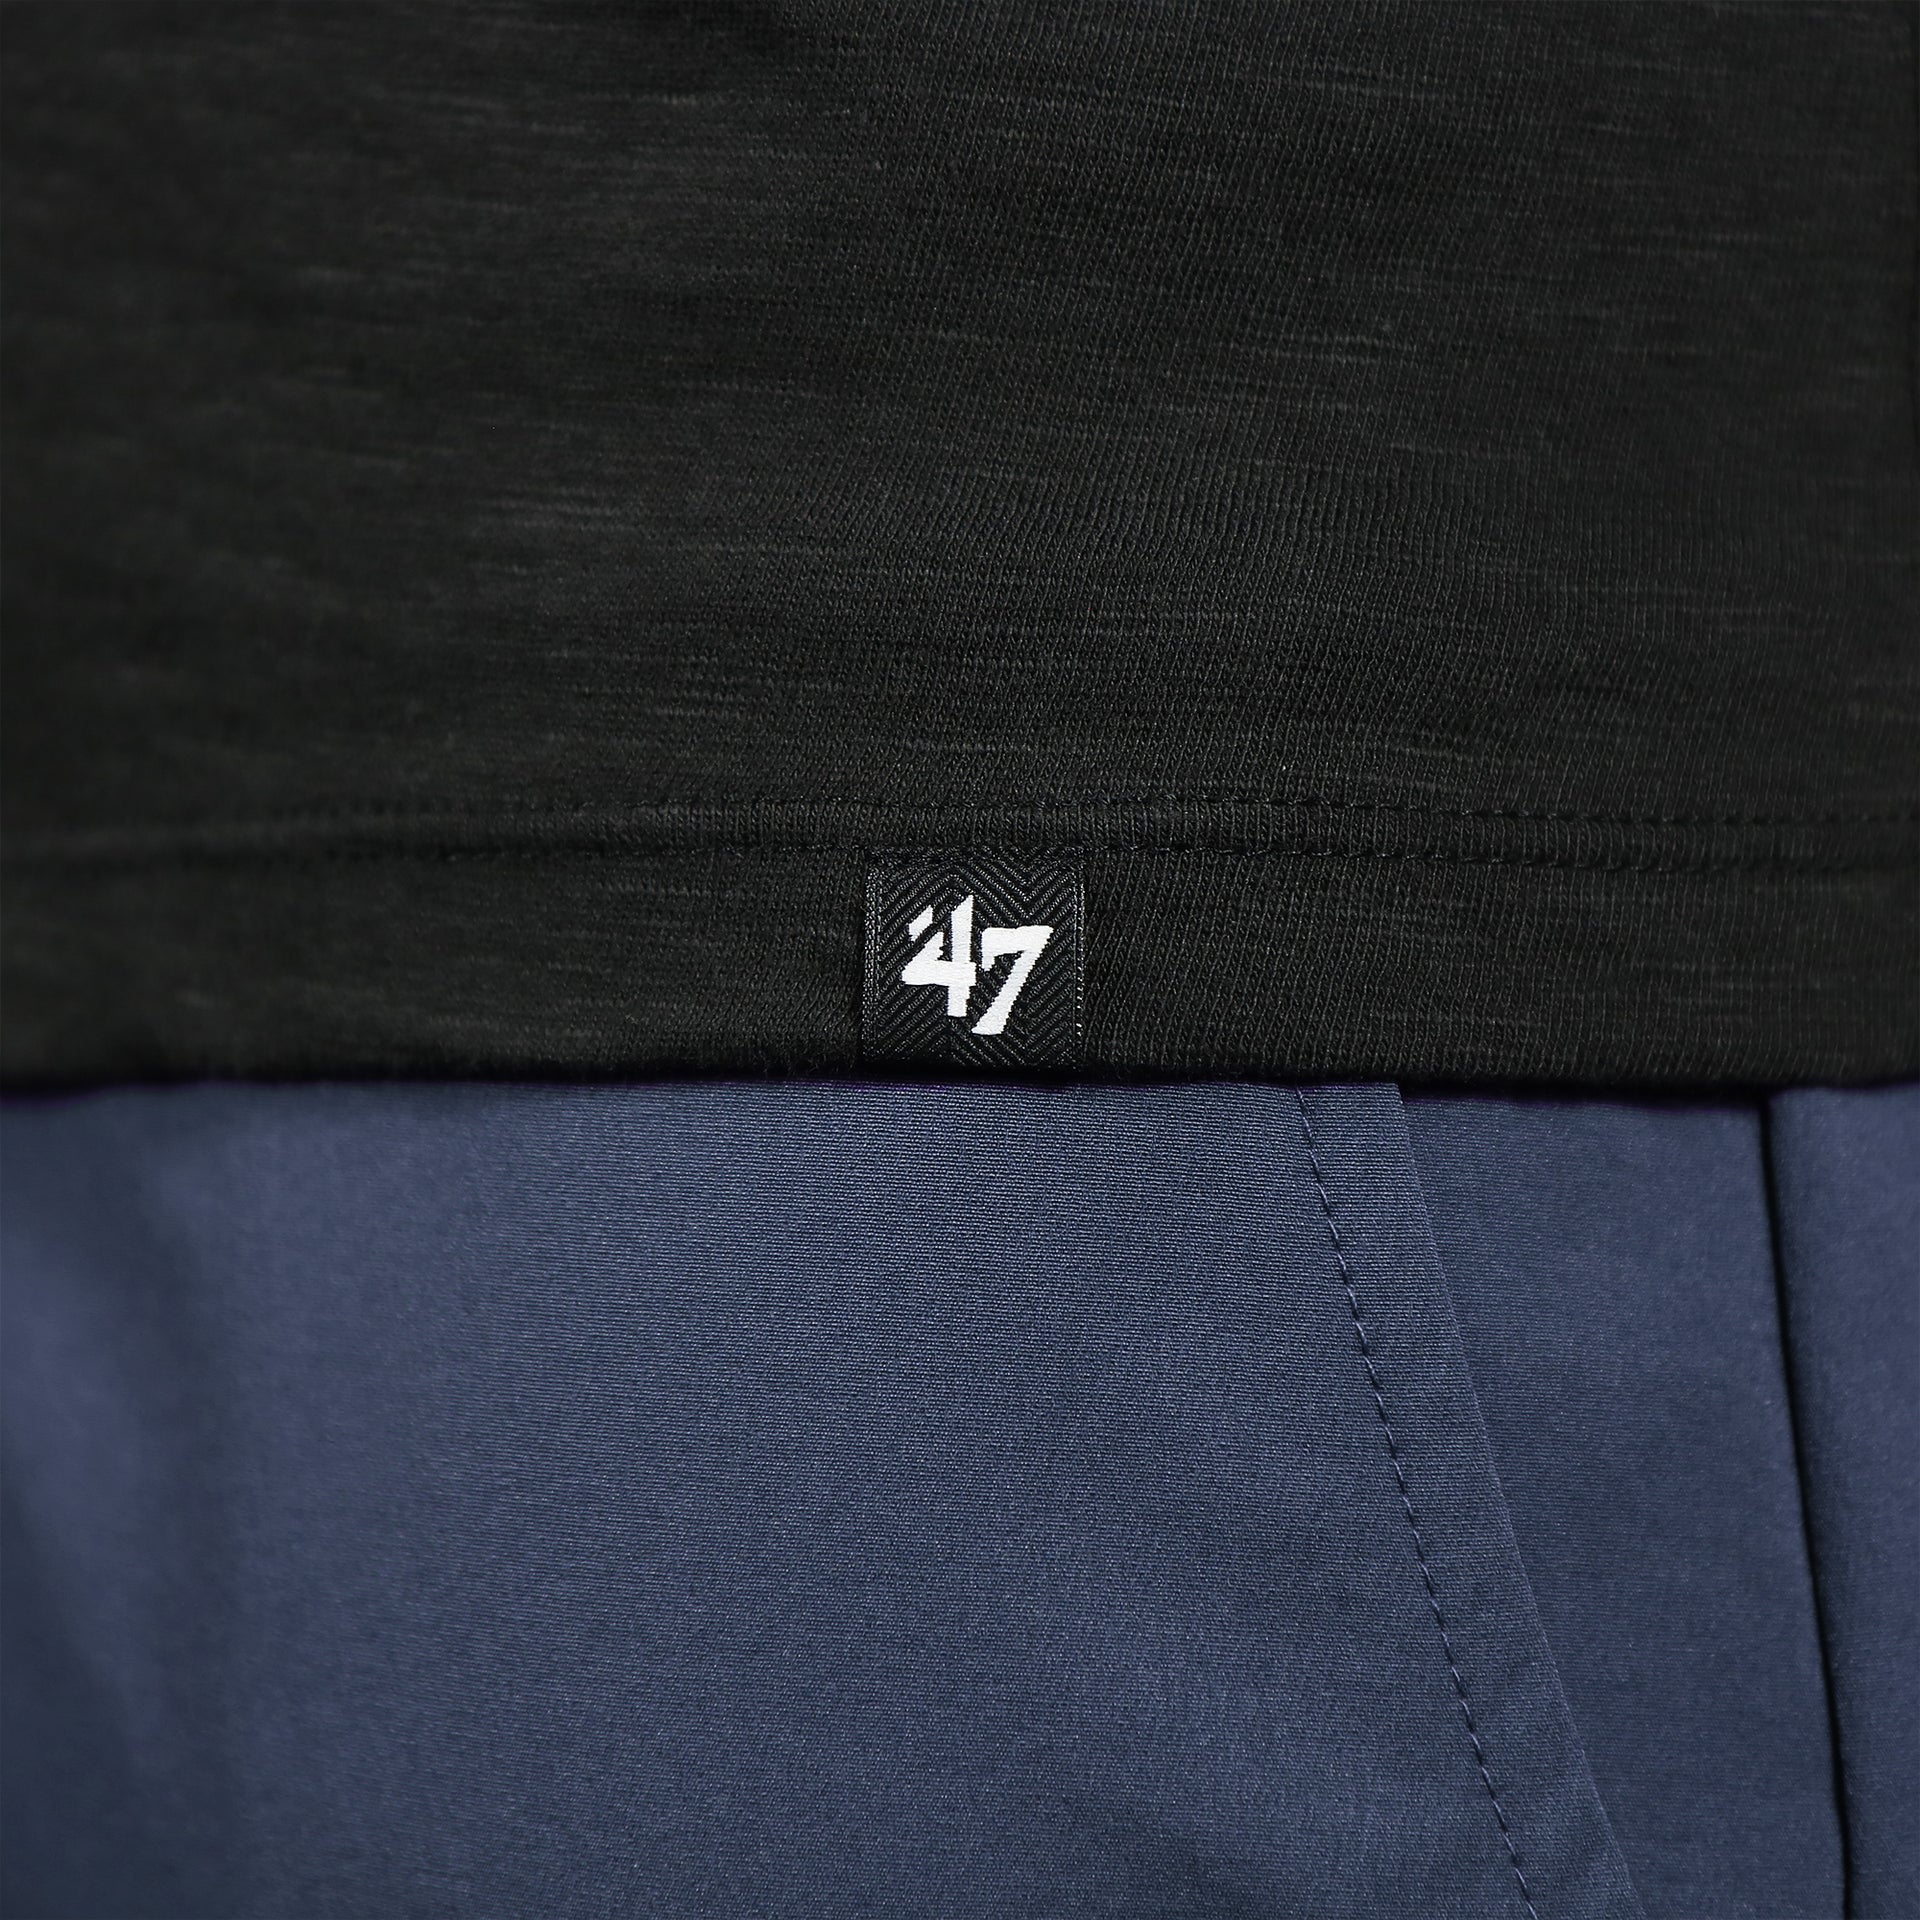 Close up of the 47 label on the front of the Philadelphia Flyers Distressed Logo Premium Grit Scrum Black T-Shirt